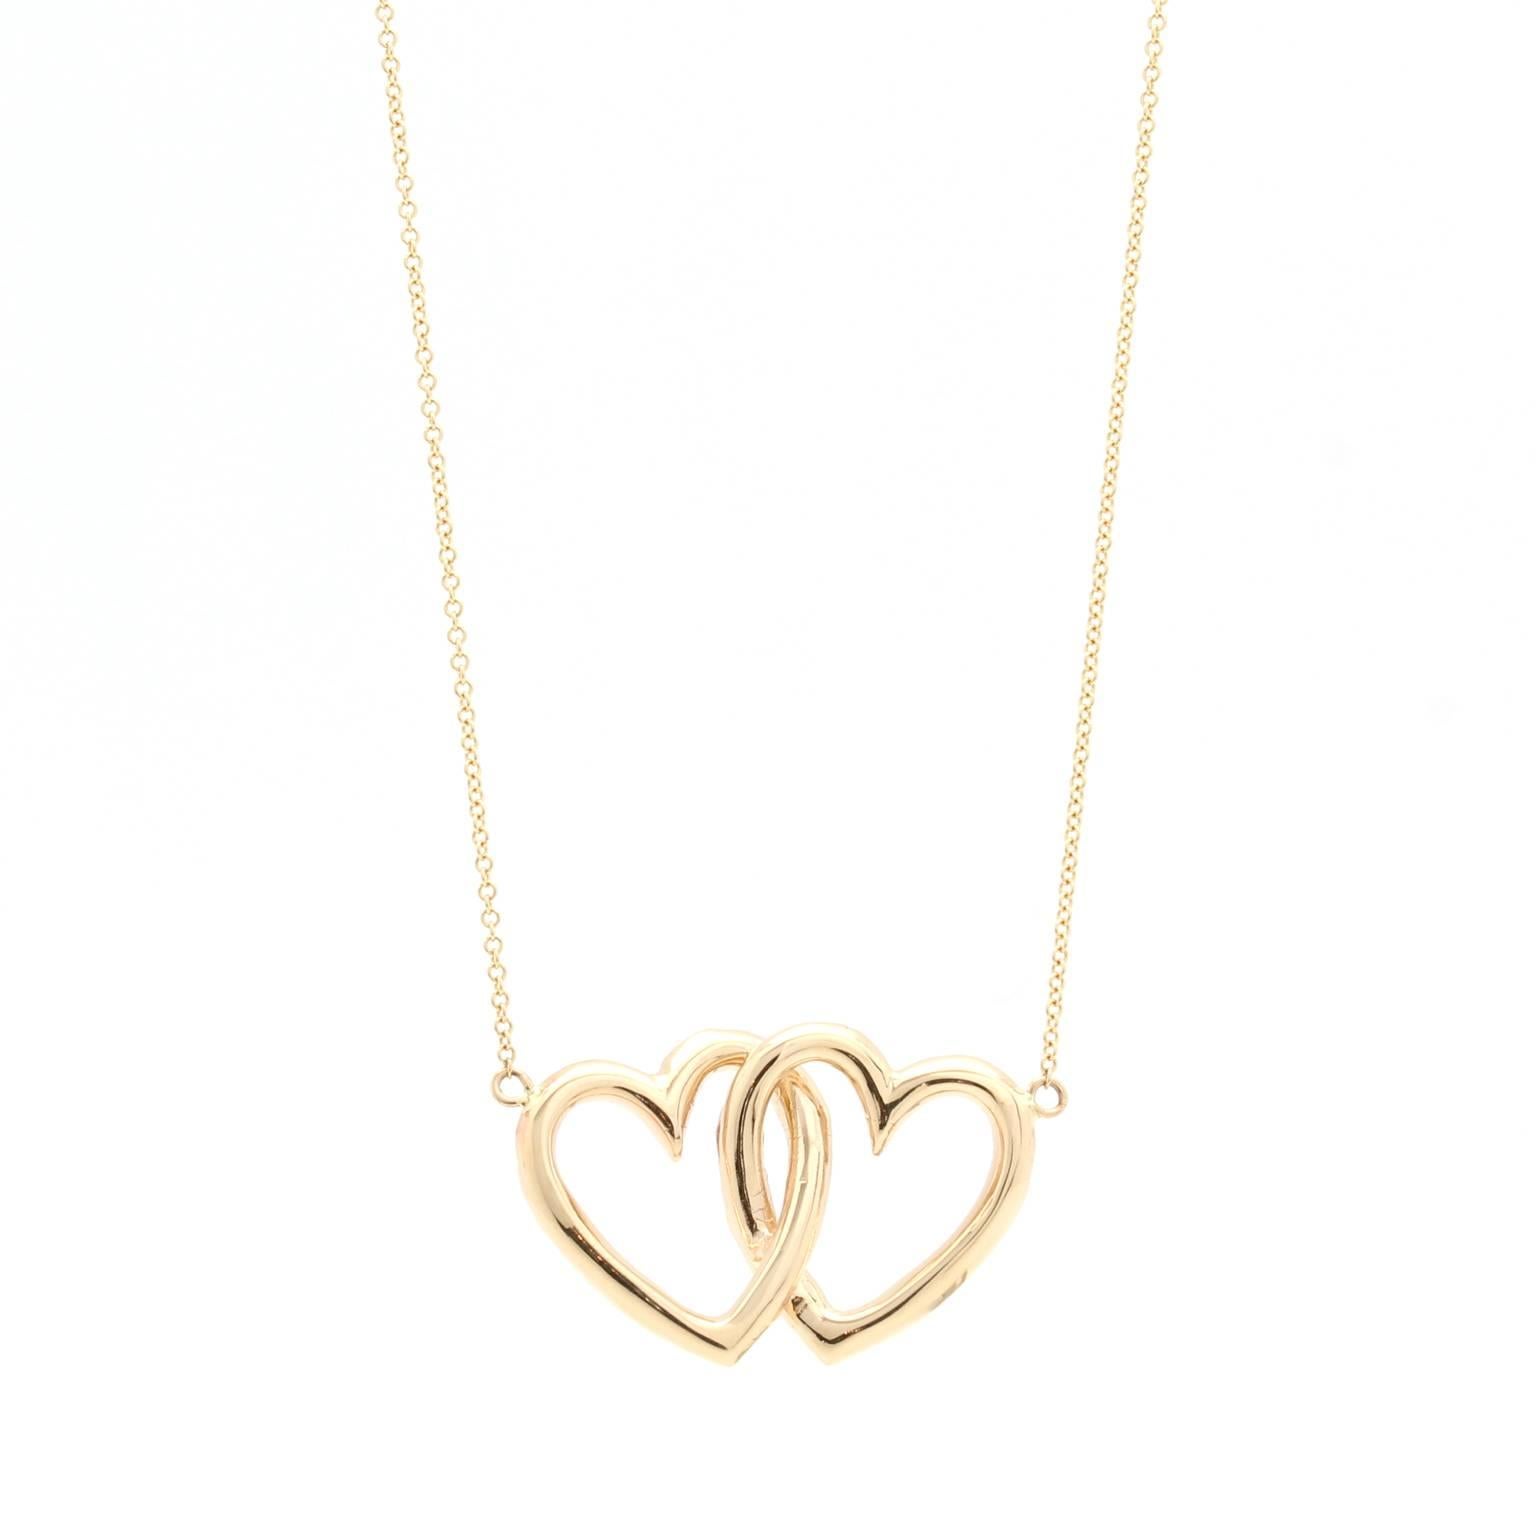 This 14k yellow gold necklace features two ornately carved overlapping hearts. 
The pendant measures 28mm by 20mm and hangs from a 17″ chain. The hearts are solid metal (not hollow) and feature a polished finish. 

